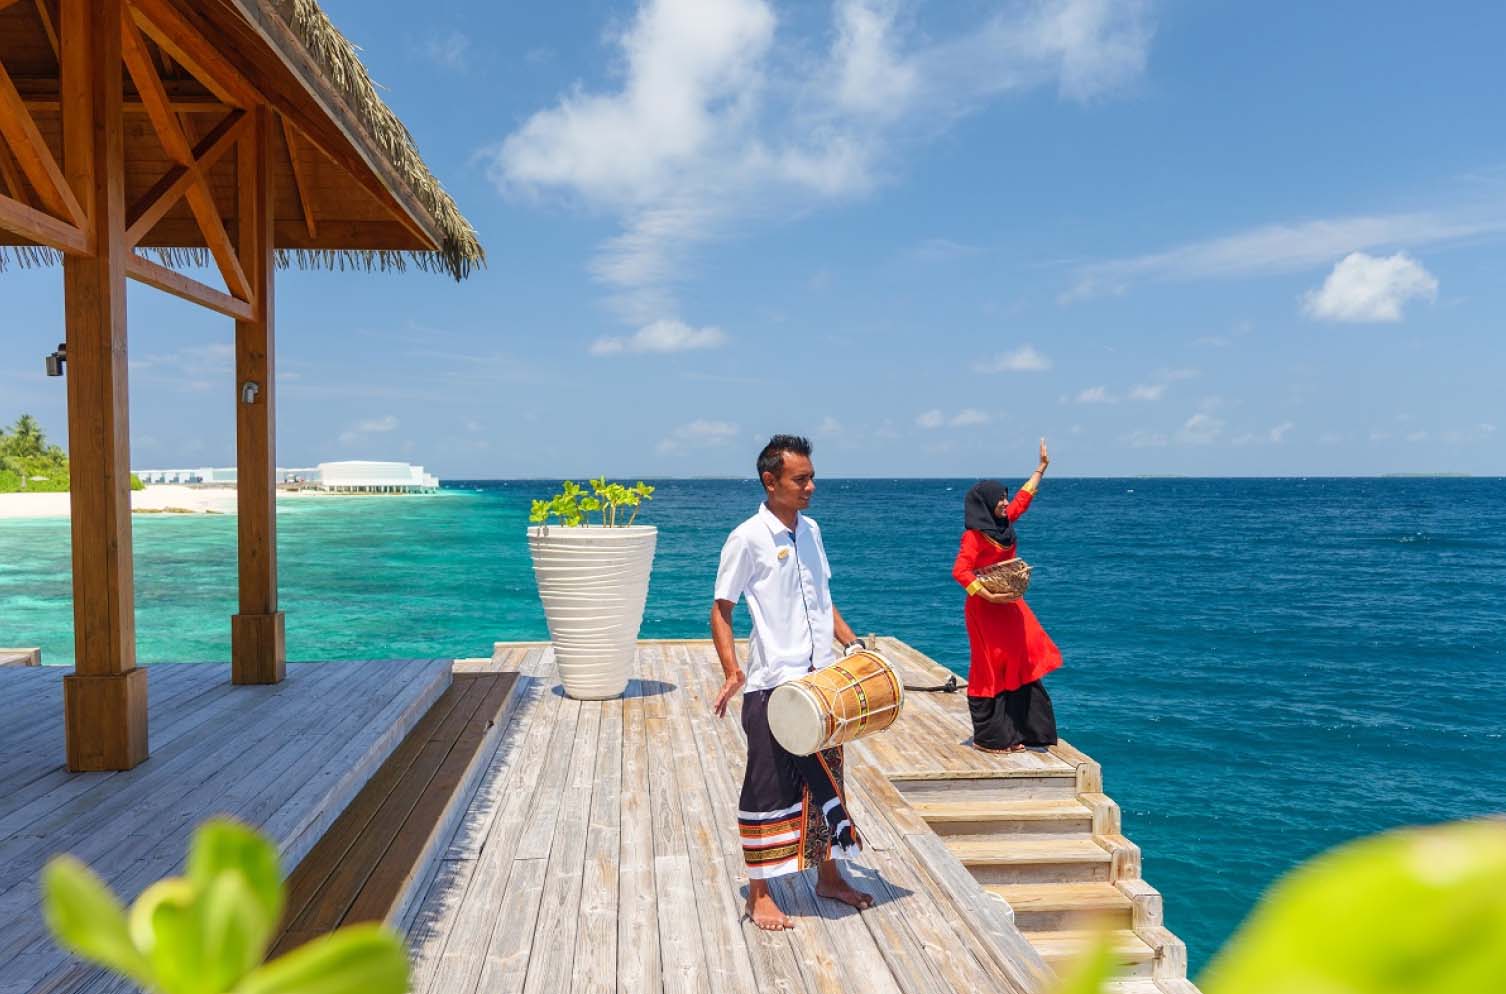 The Amilla staff welcoming guests to Amilla Resort and Residences.